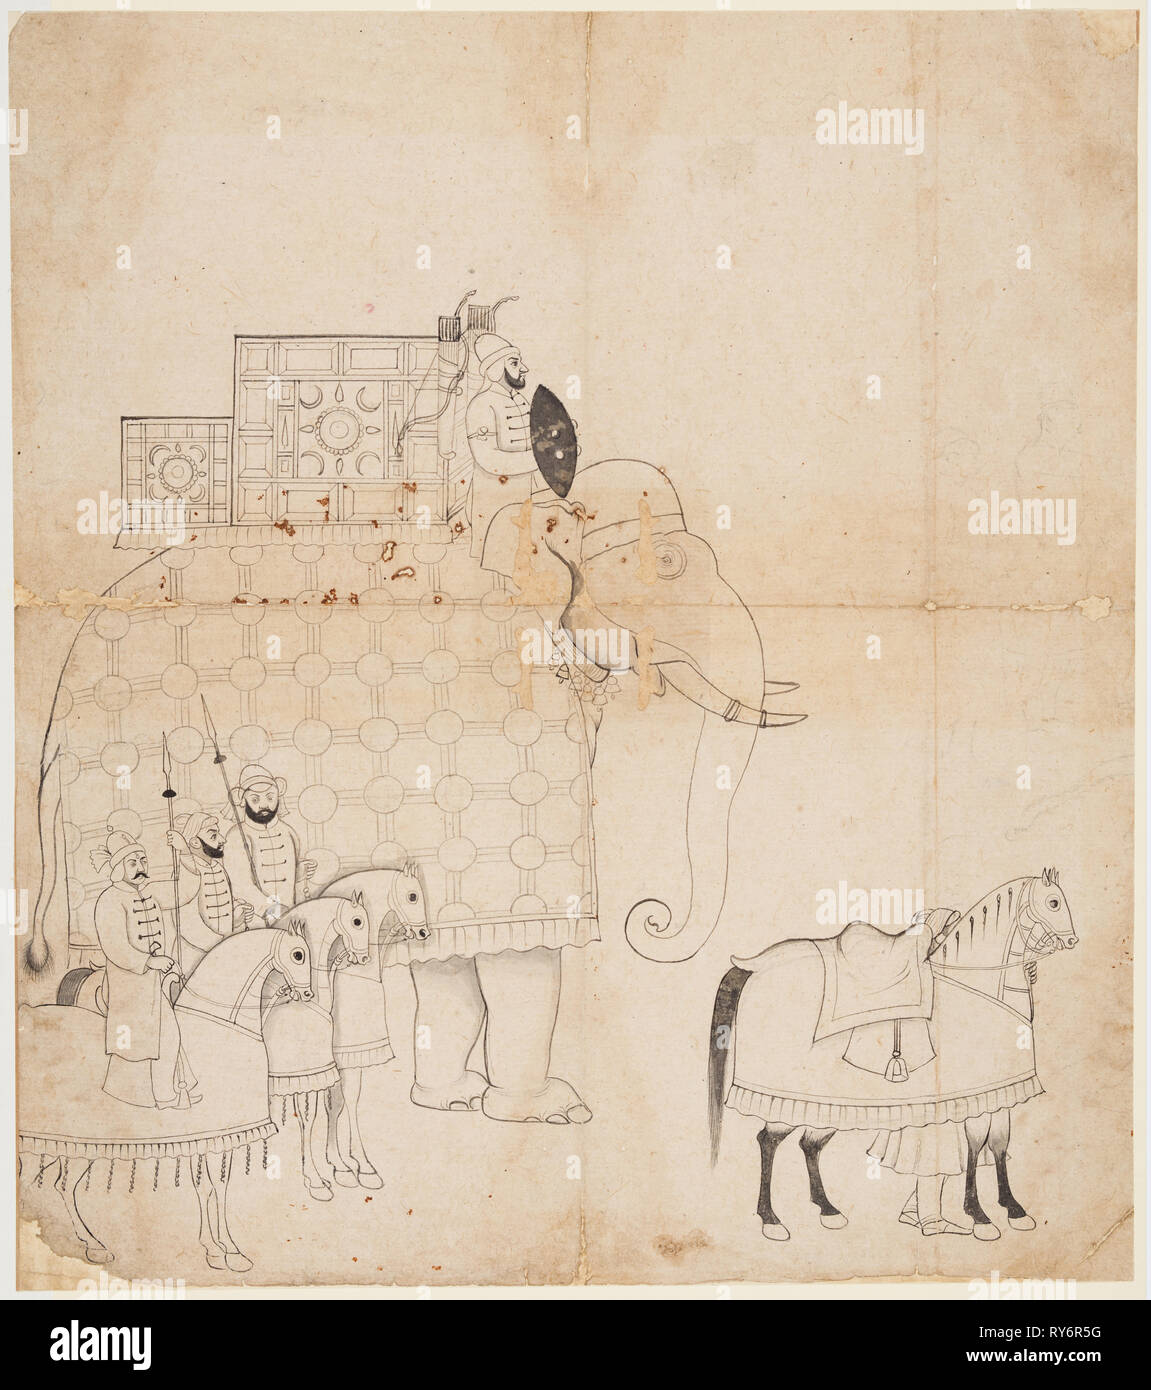 A drawing of Caparisoned Elephant and Horses, c. 1760. India, Jammu. miniature: 41 x 36.2 cm (16 1/8 x 14 1/4 in Stock Photo